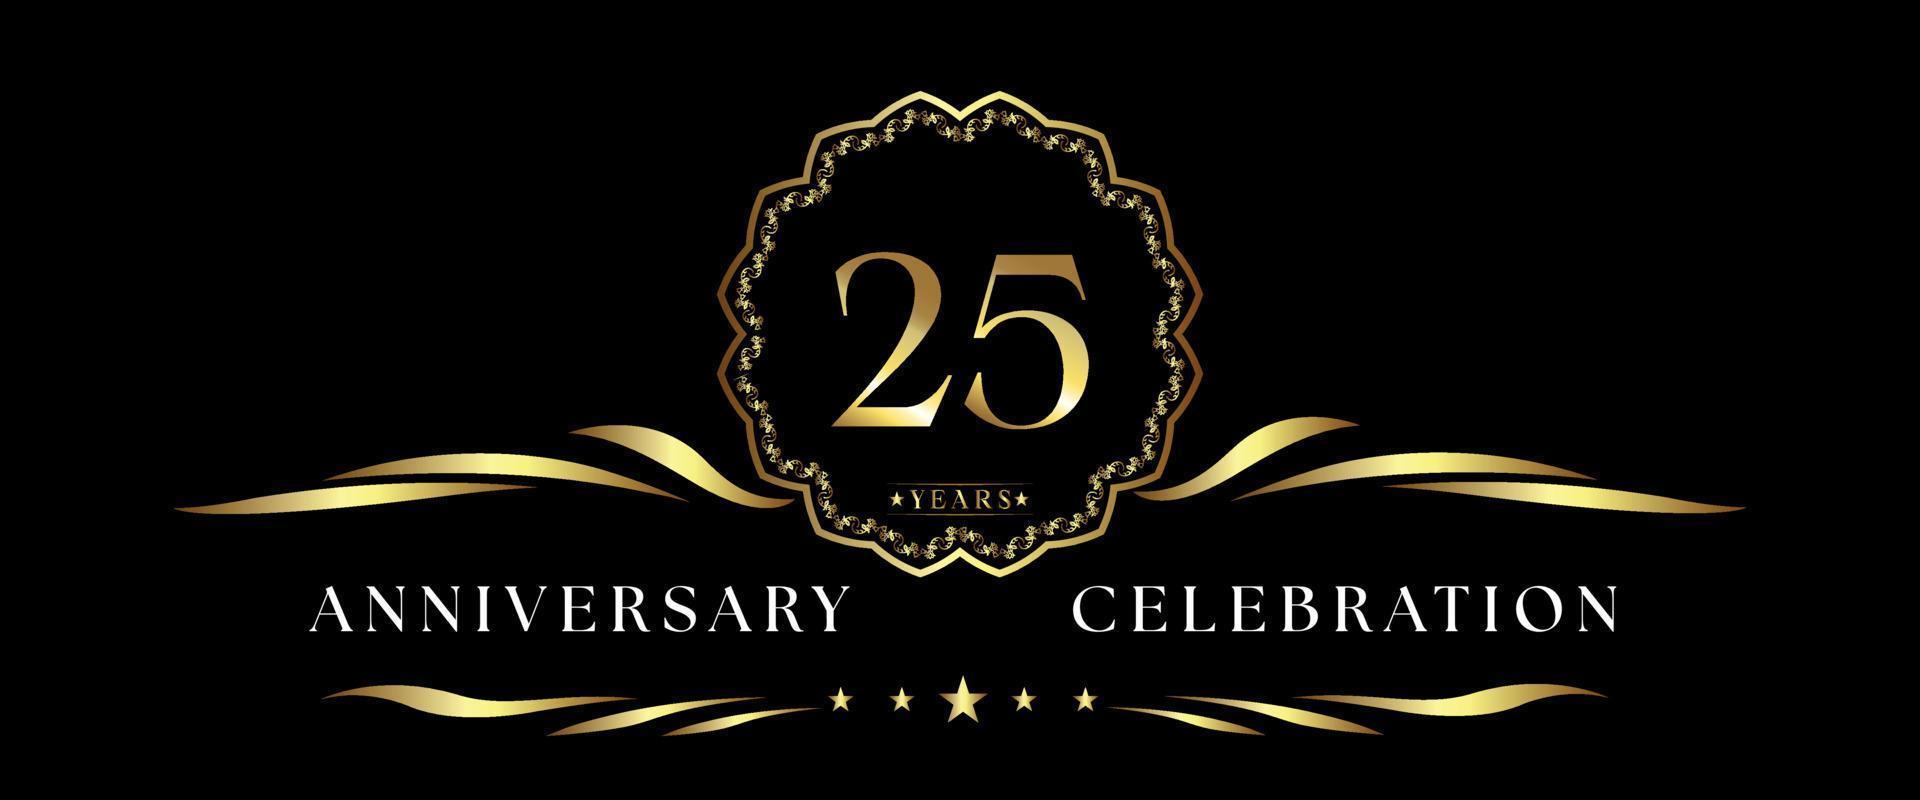 25 years anniversary celebration with gold decorative frame isolated on black background. Vector design for greeting card, birthday party, wedding, event party, ceremony. 25 years Anniversary logo.